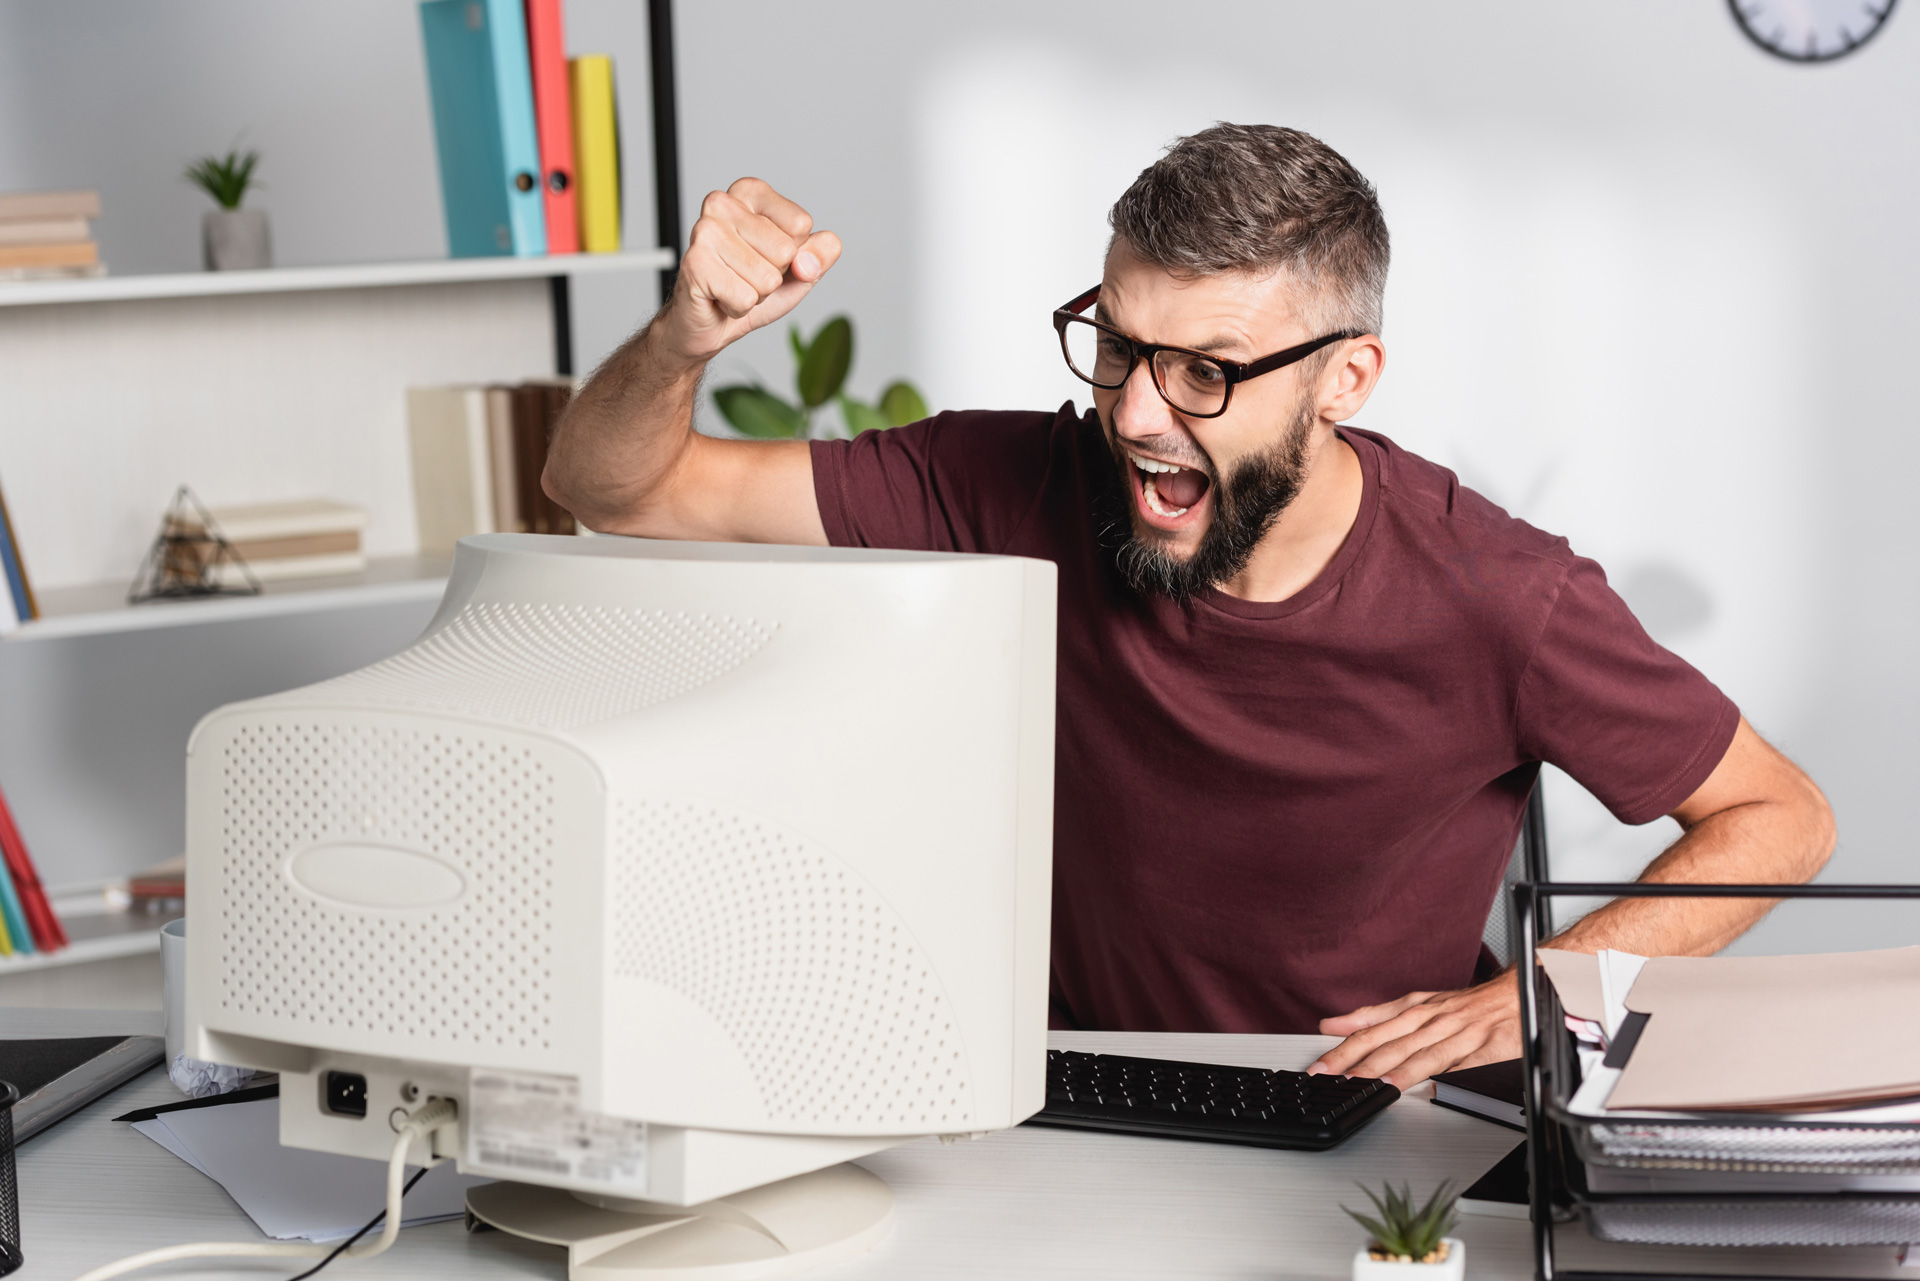 Complex Website Tasks Increase the Expression of Anger 